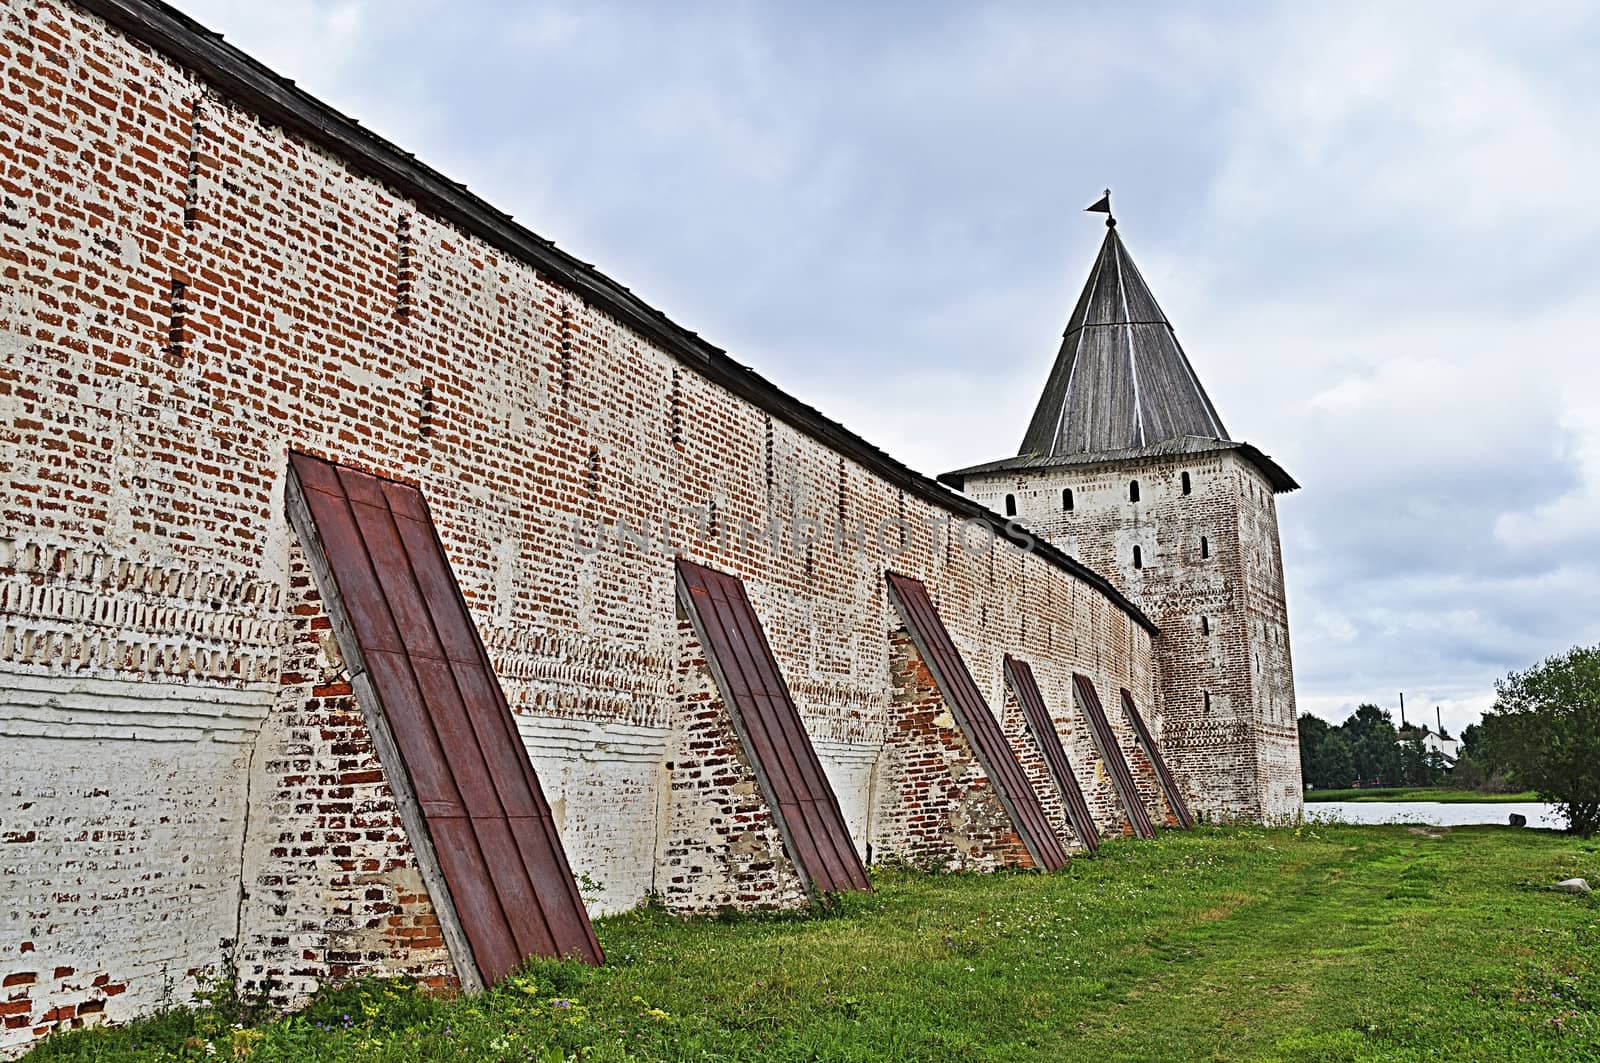 Svitochnaya tower and wall with buttresses of the Kirillo-Belozersky (St. Cyril-Belozersky) monastery